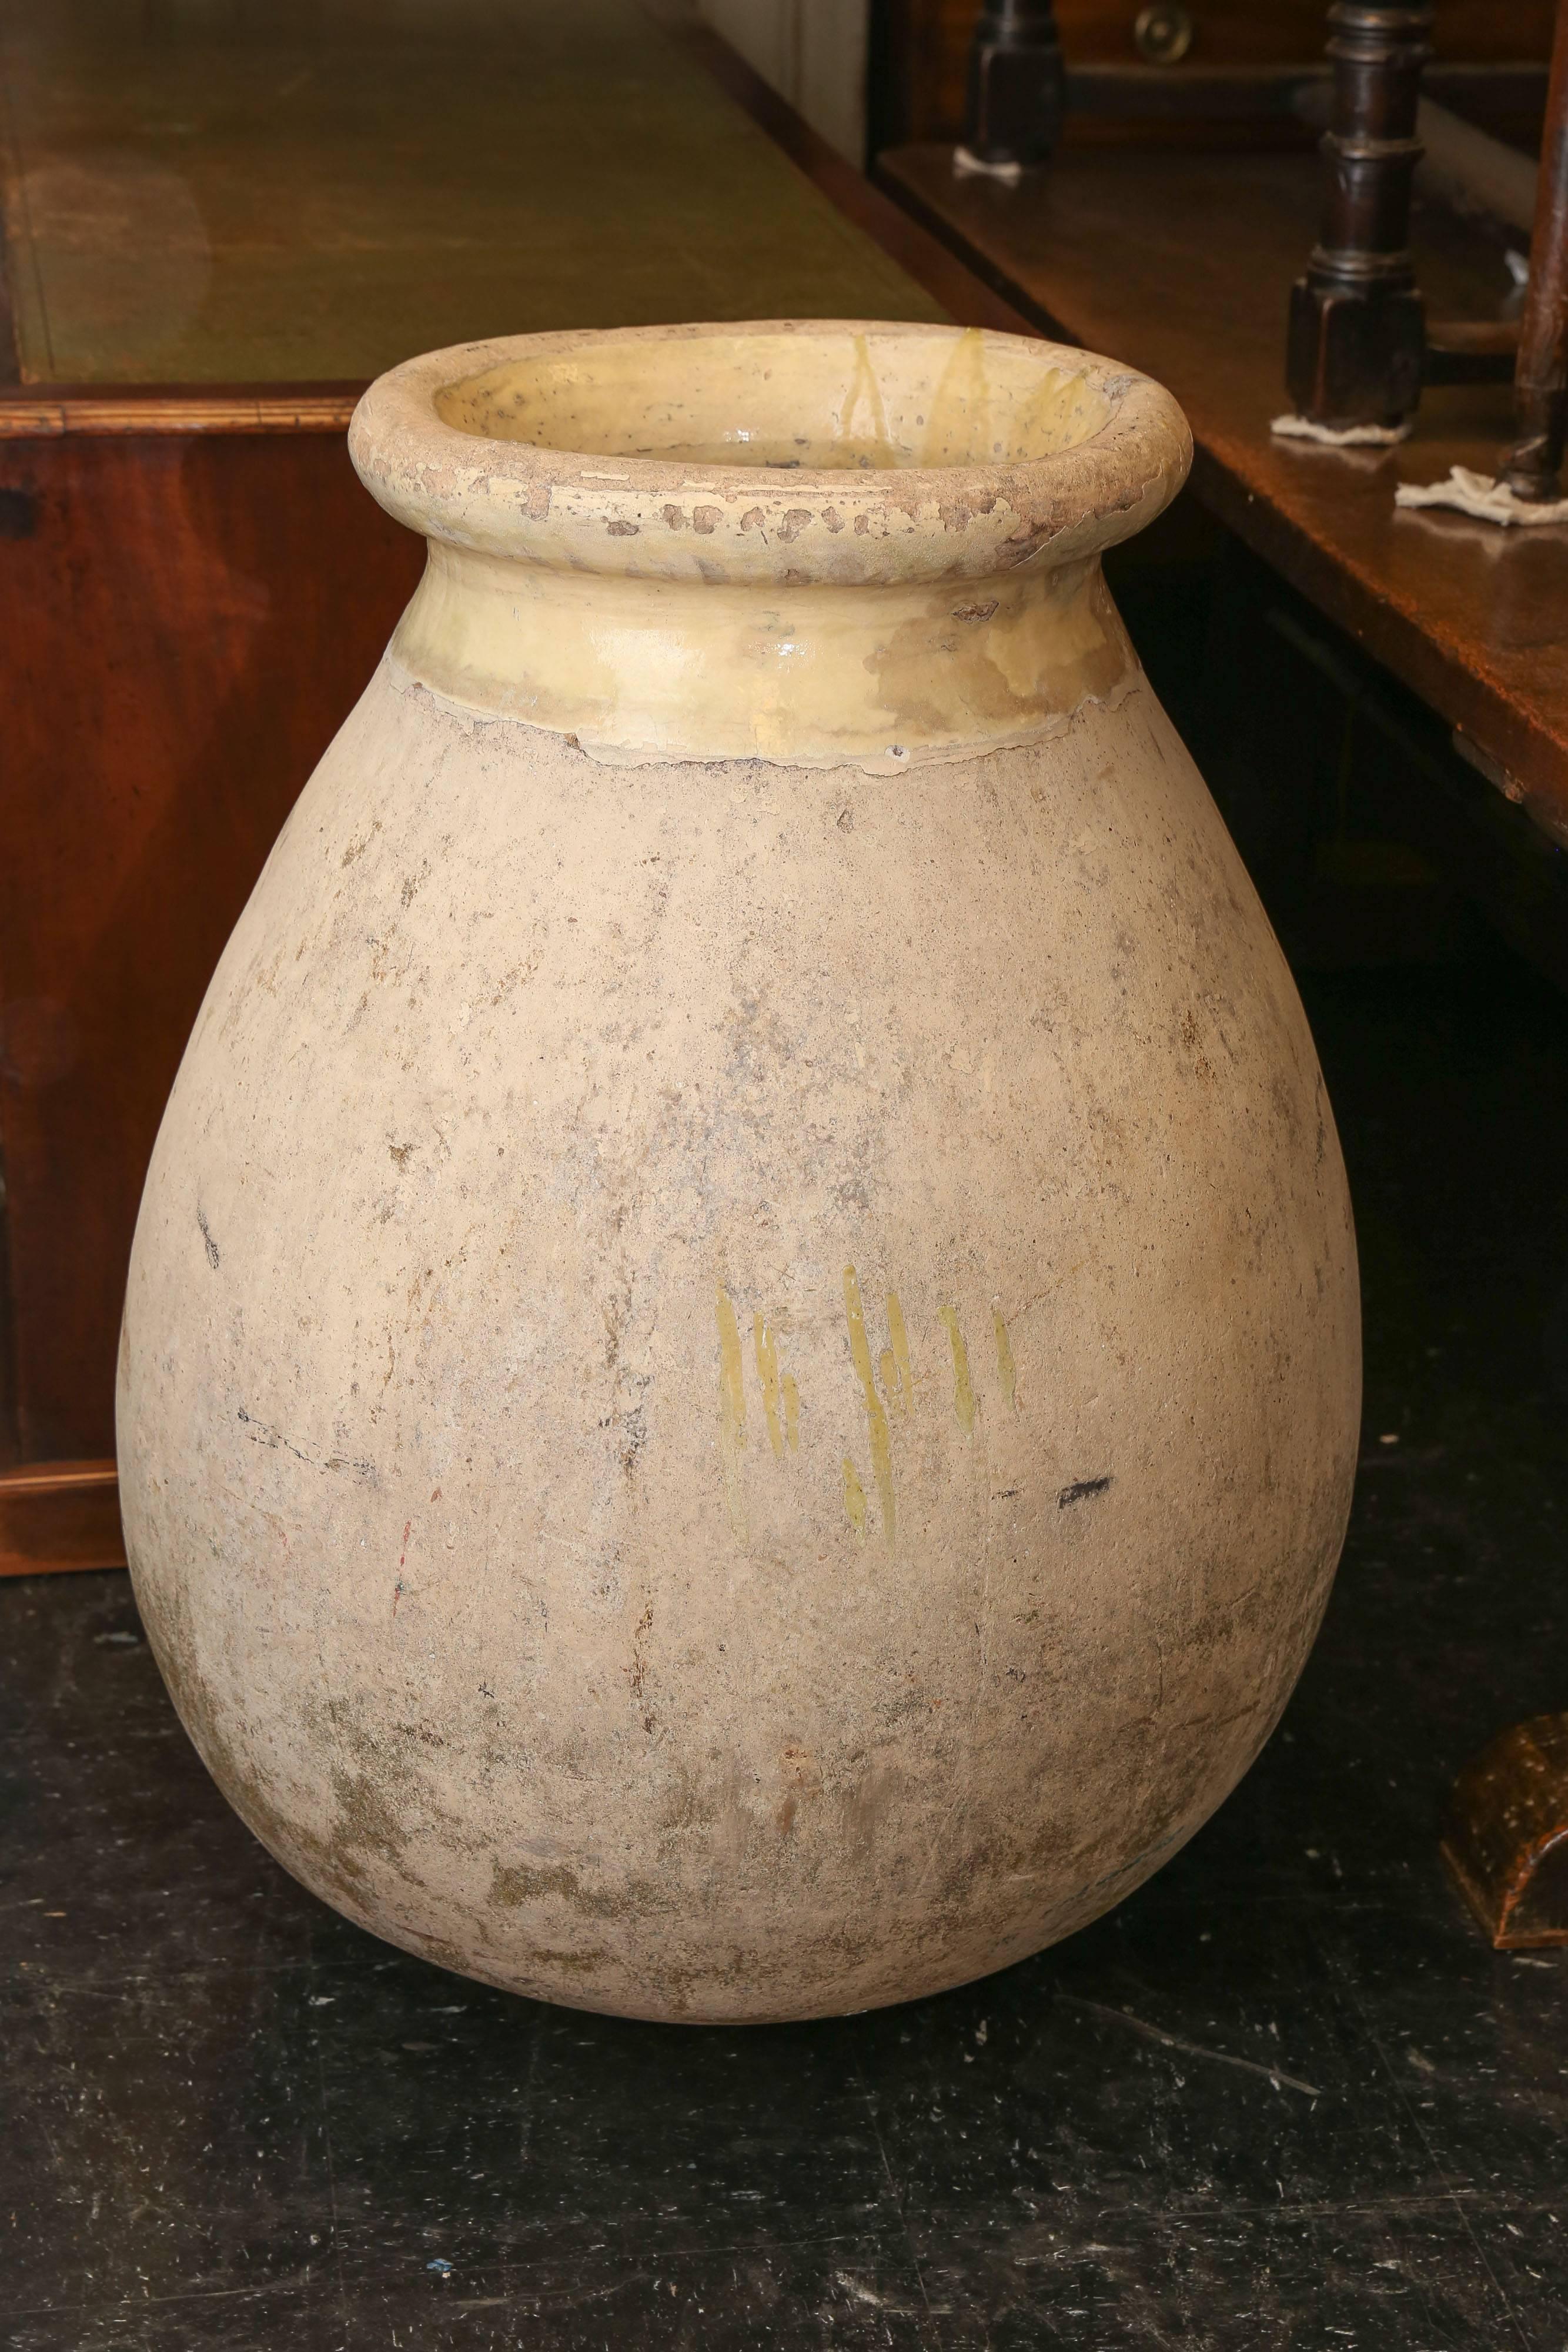 Large 18th century Biot jar with light yellow glaze at rim of opening and inside. These were used to transport olives by ship to the French colonies throughout the world. Opening diameter is 18 inches wide.